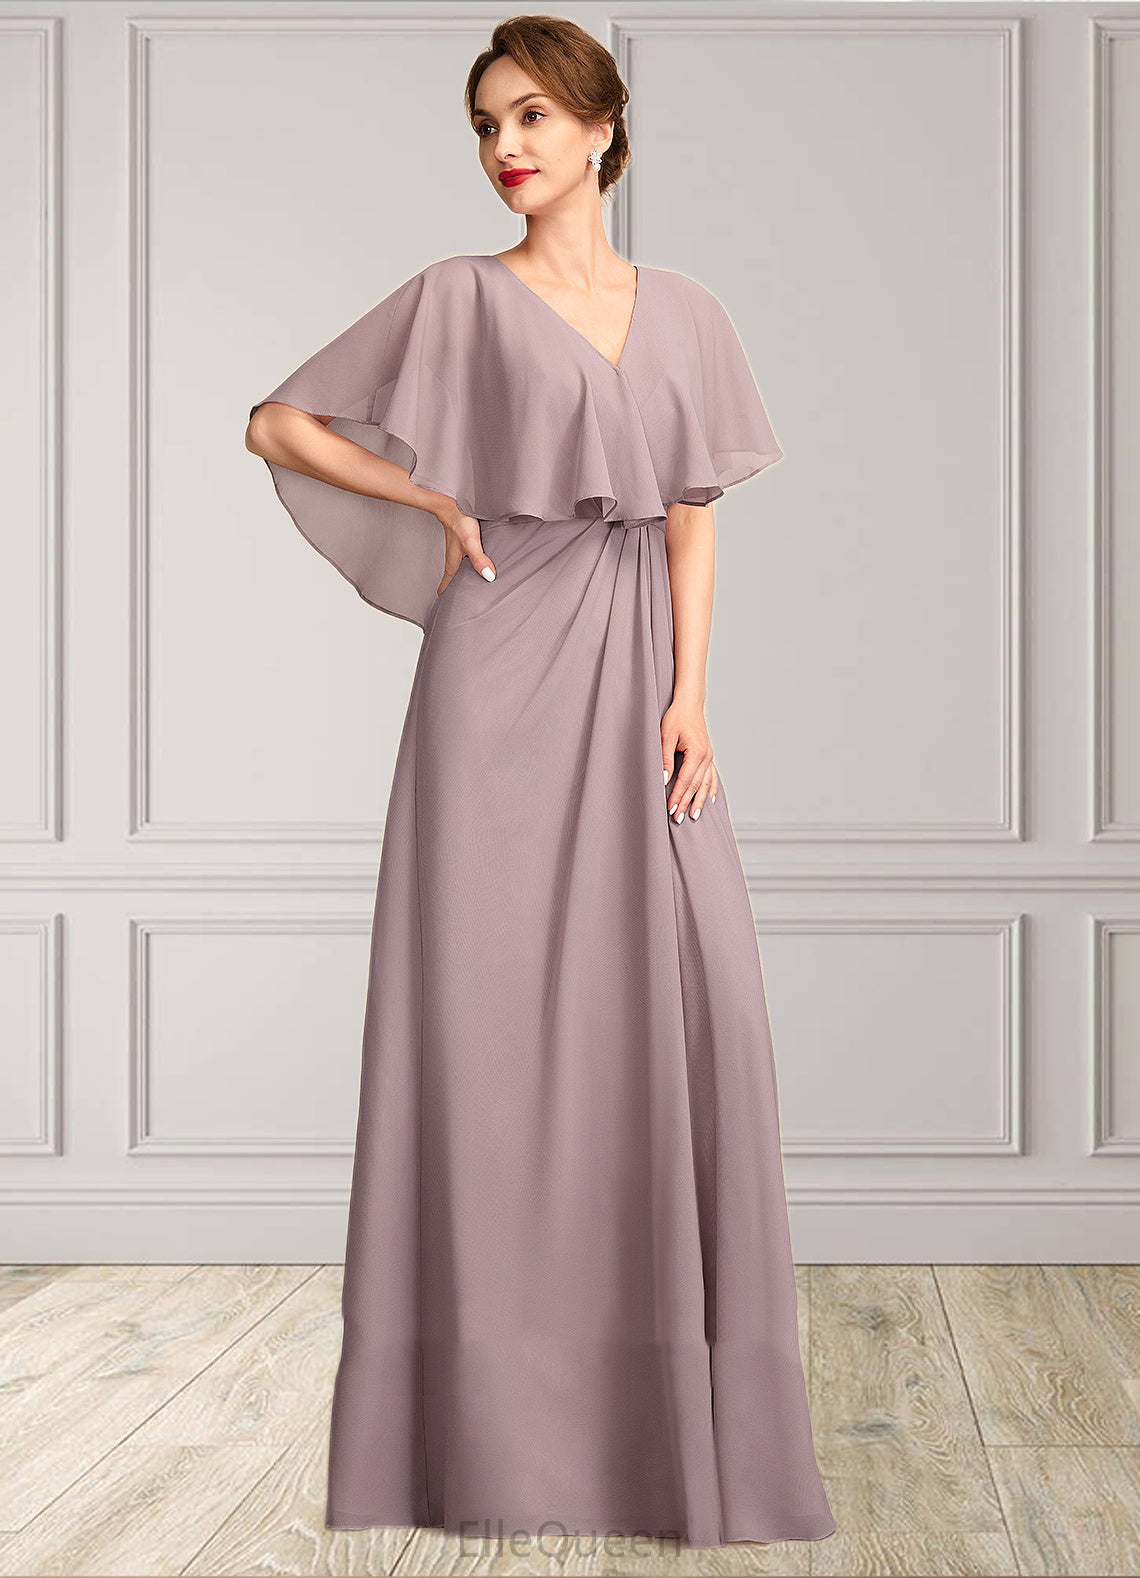 Willow A-Line V-neck Floor-Length Chiffon Mother of the Bride Dress With Ruffle DG126P0015026